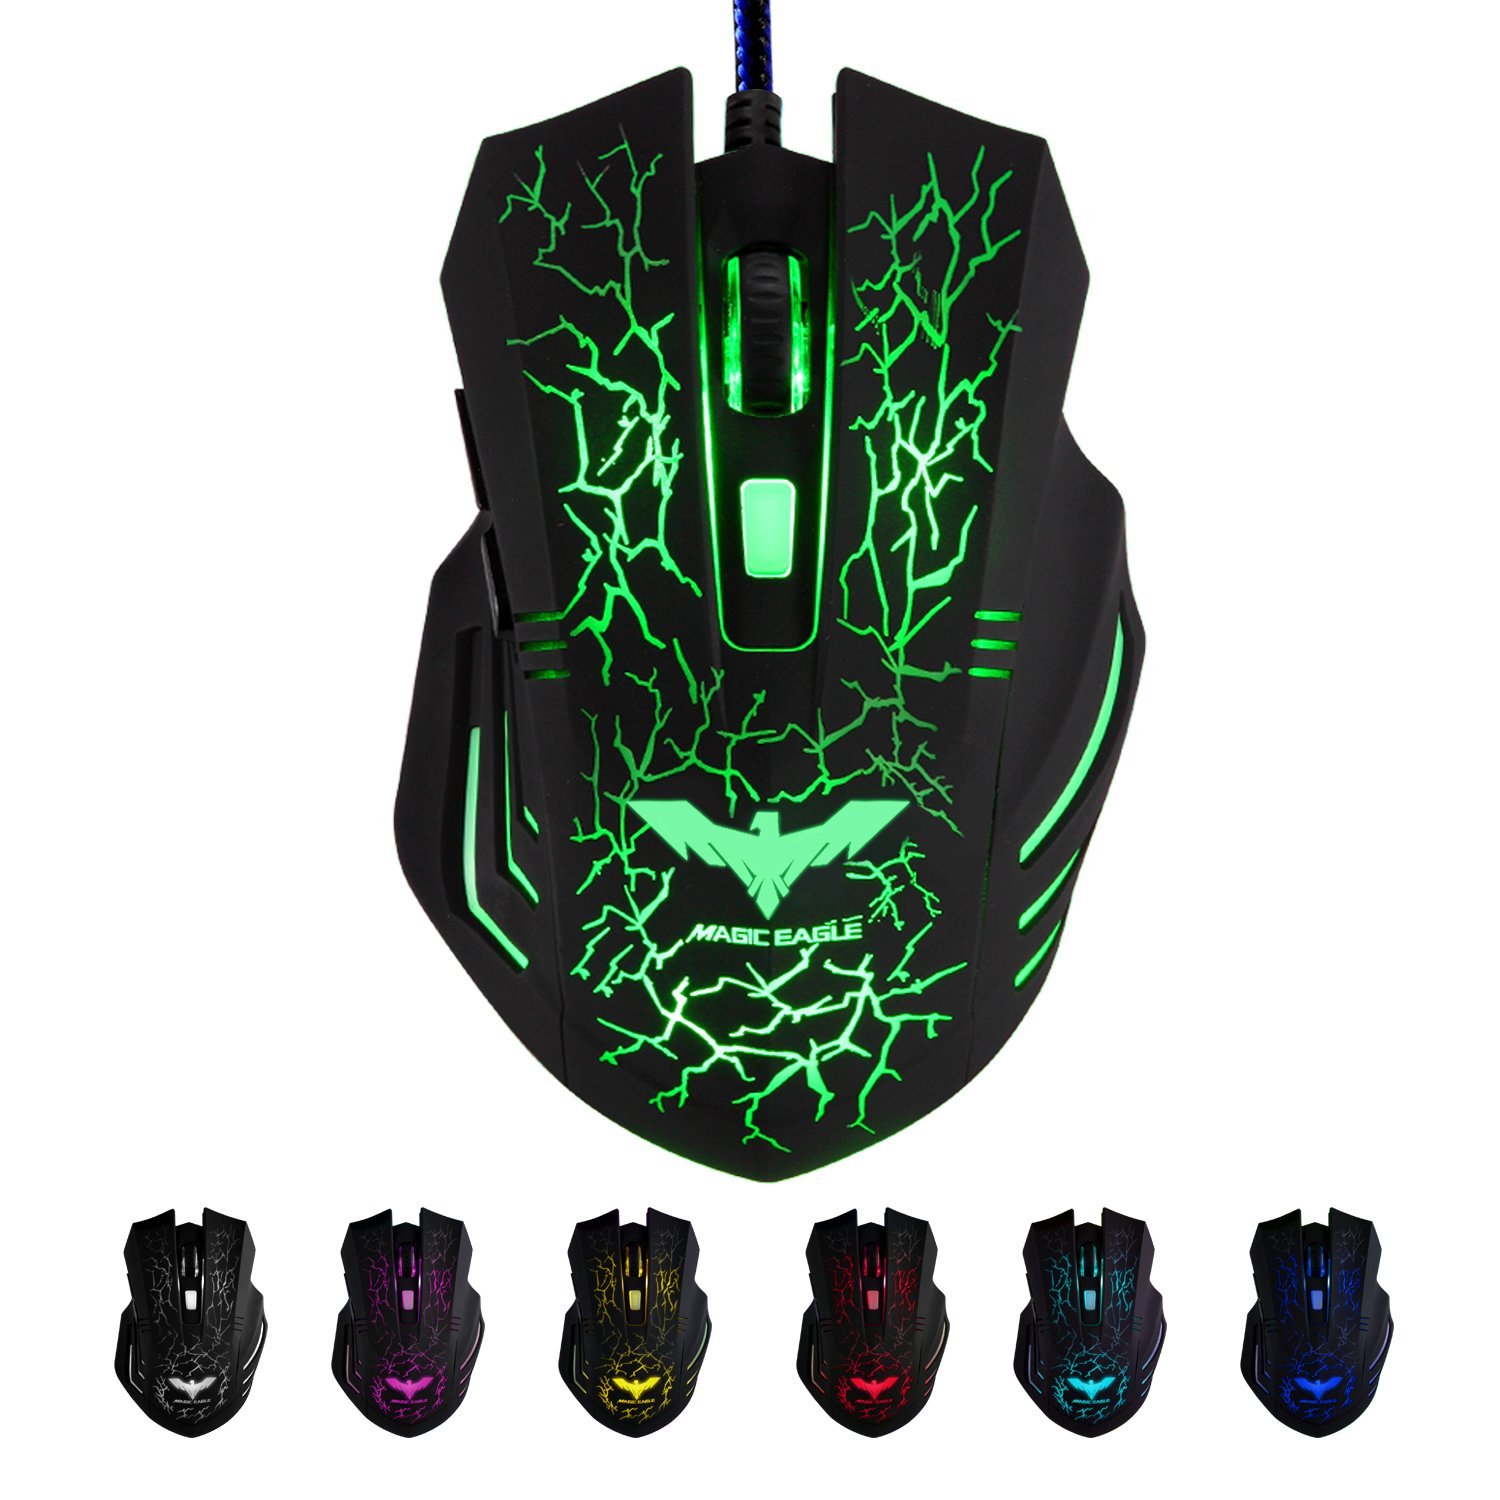 magic eagle gaming mouse color changeing